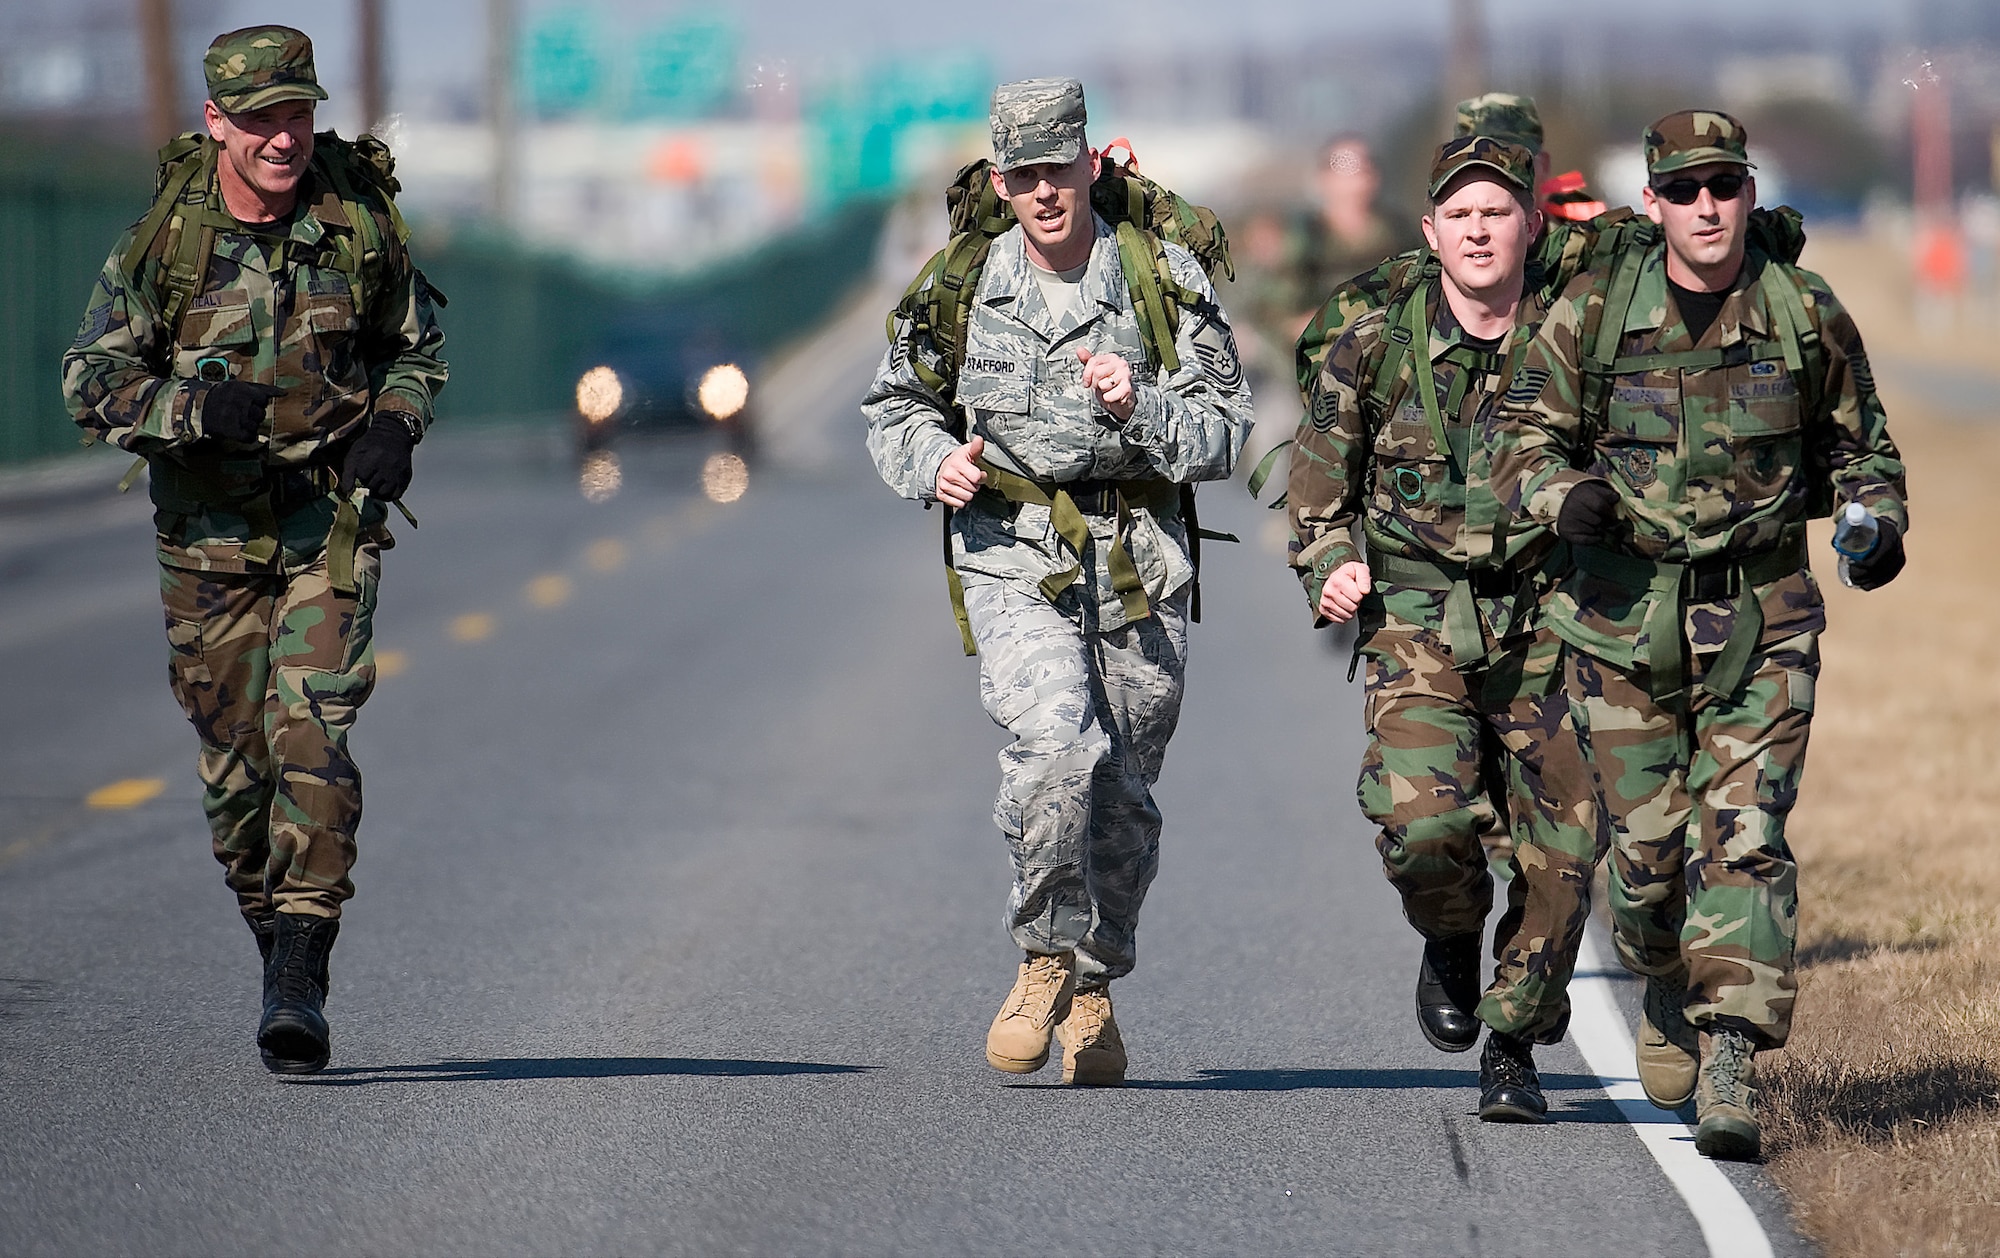 (Left to right) Master Sgt. (ret.) John Healy, Master Sgt. Marshall Stafford, 436th Aerial Port Squadron, Tech. Sgt. Jason Gist, 436th Communications Squadron, and Tech. Sgt. Christopher Thompson, 436th CS, make their trek on Perimeter Road towards the finish line for the 10th Annual Ruck March Feb. 21 at the Air Mobility Command Museum. (U.S. Air Force photo/ Roland Balik)